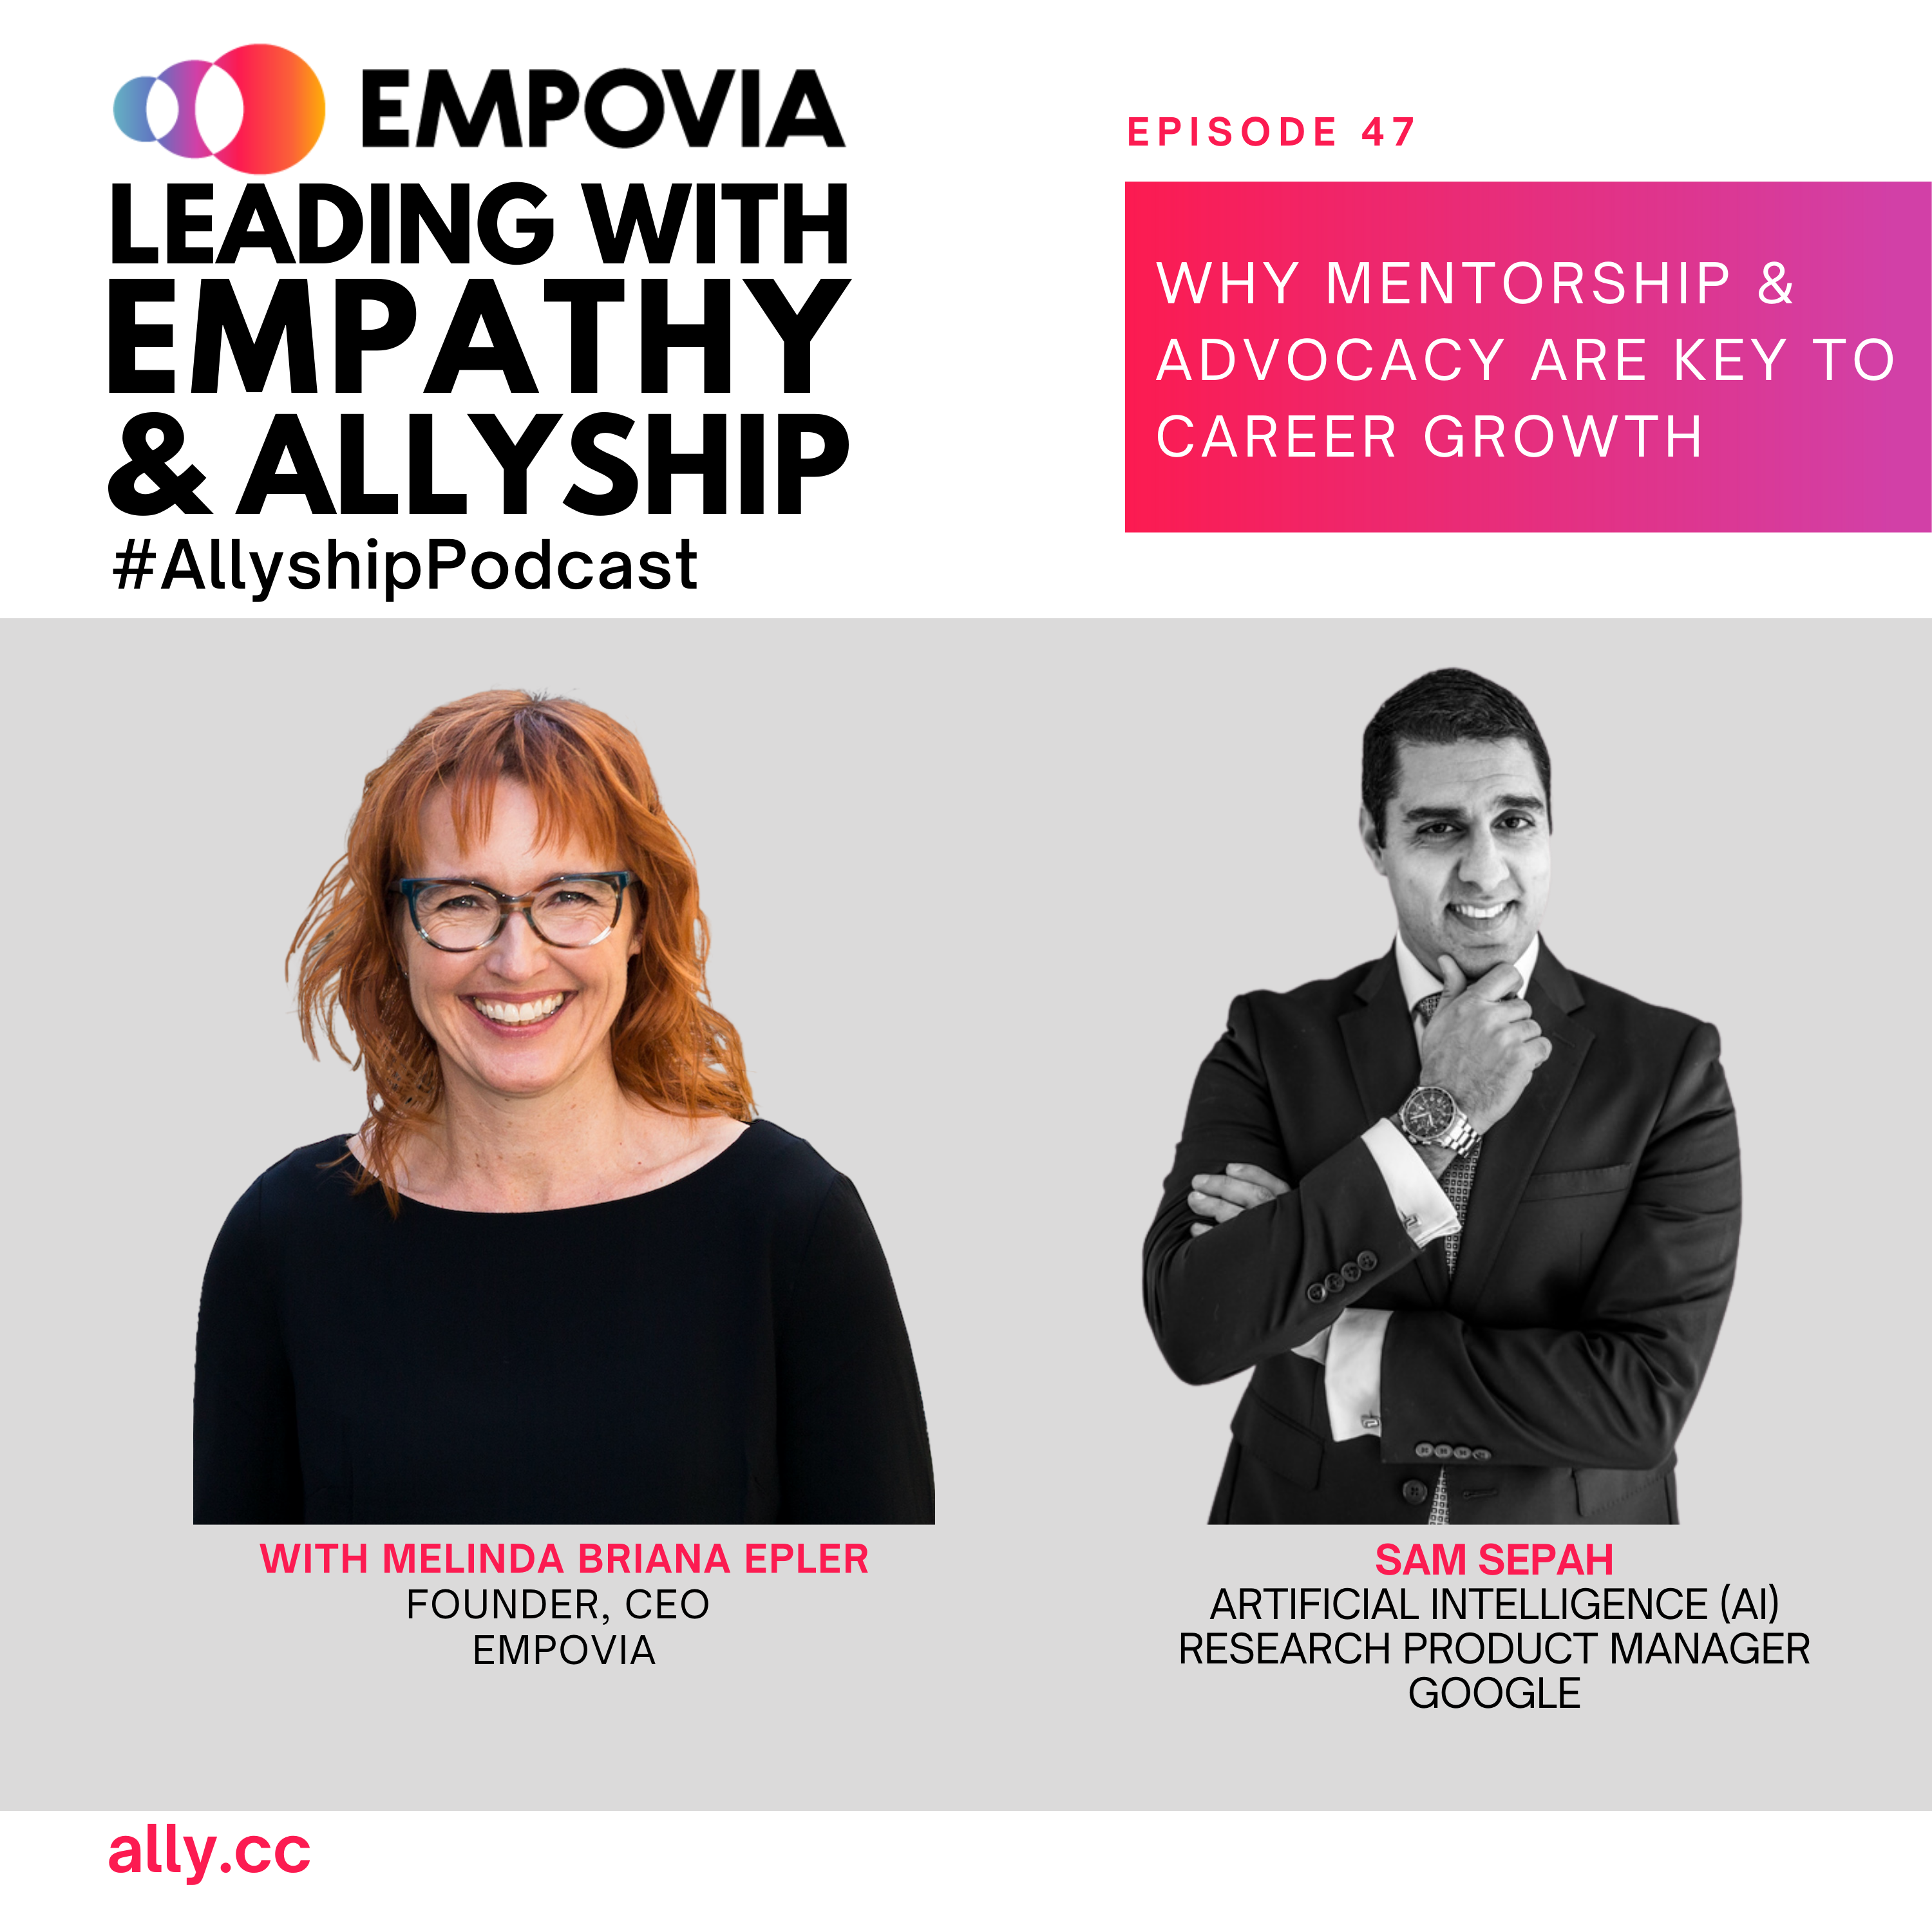 Leading With Empathy & Allyship promo with the Empovia logo, a color photo of host Melinda Briana Epler, a White woman with red hair and glasses, and a black and white photo of Sam Sepah, a Persian man with black hair, white shirt, and blazer.